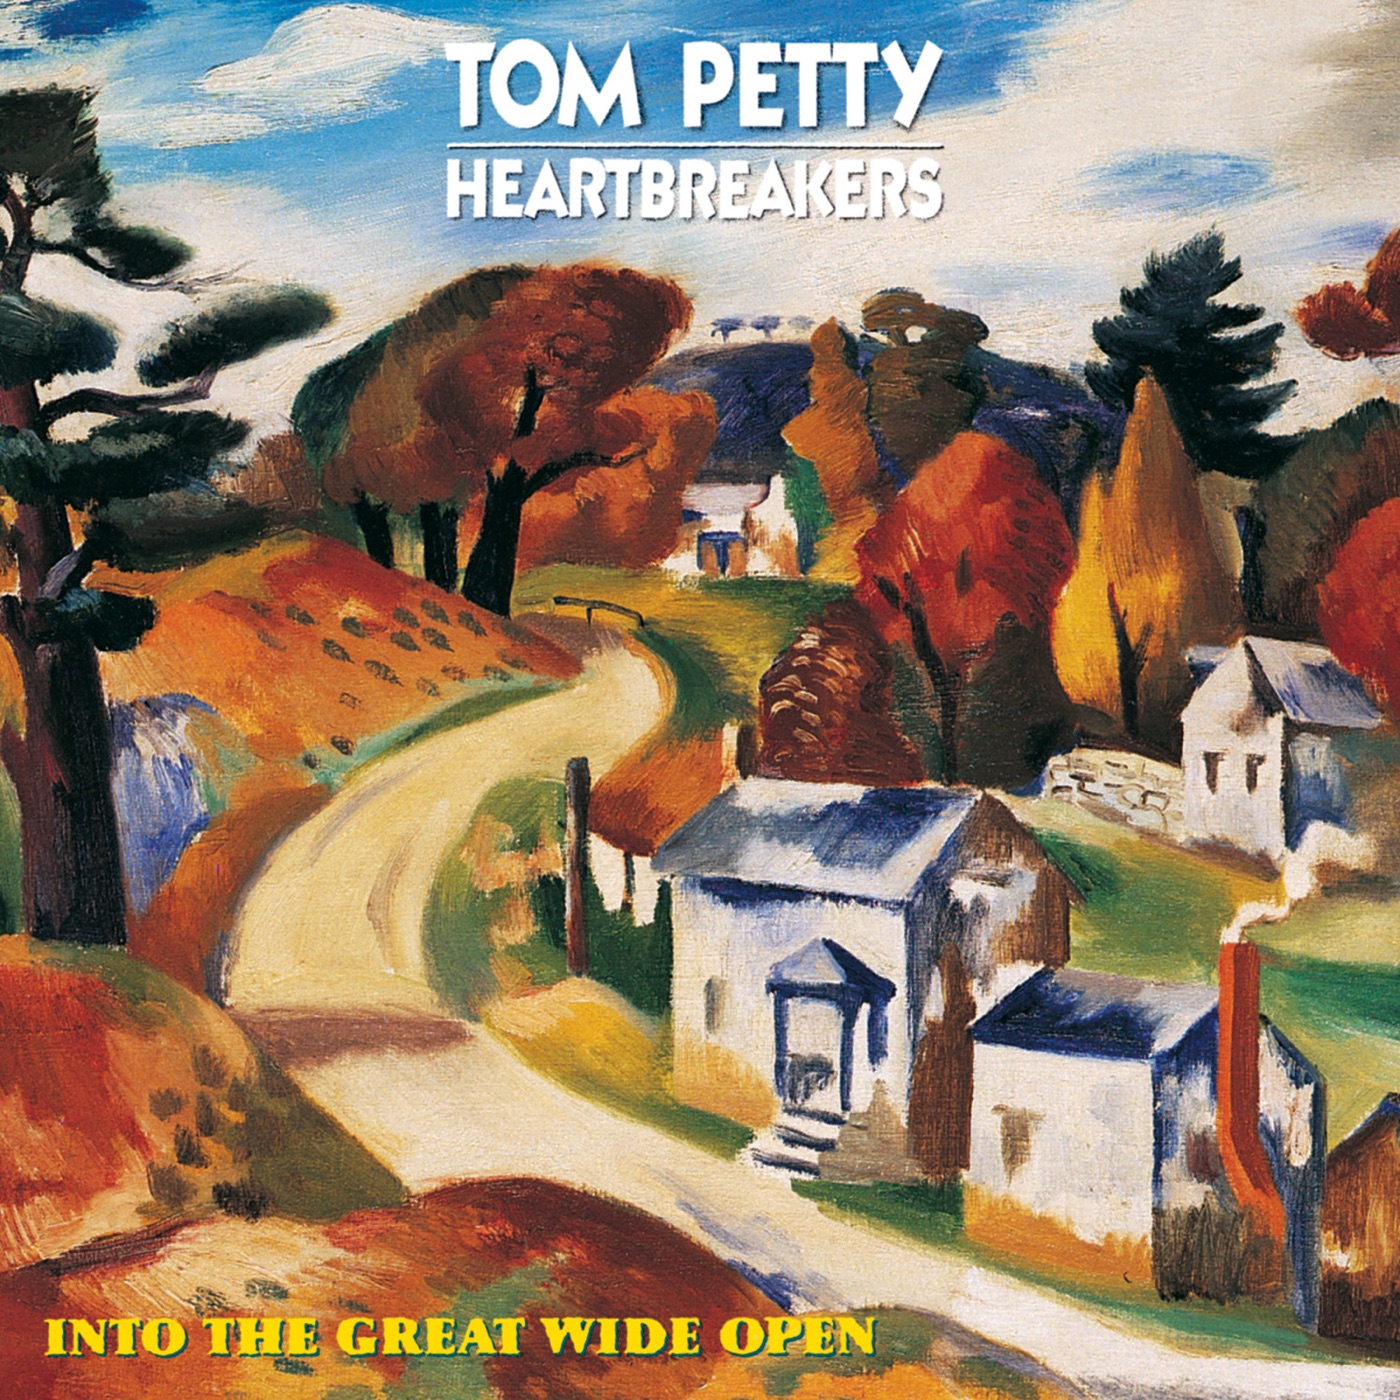 Into the Great Wide Open by Tom Petty and the Heartbreakers